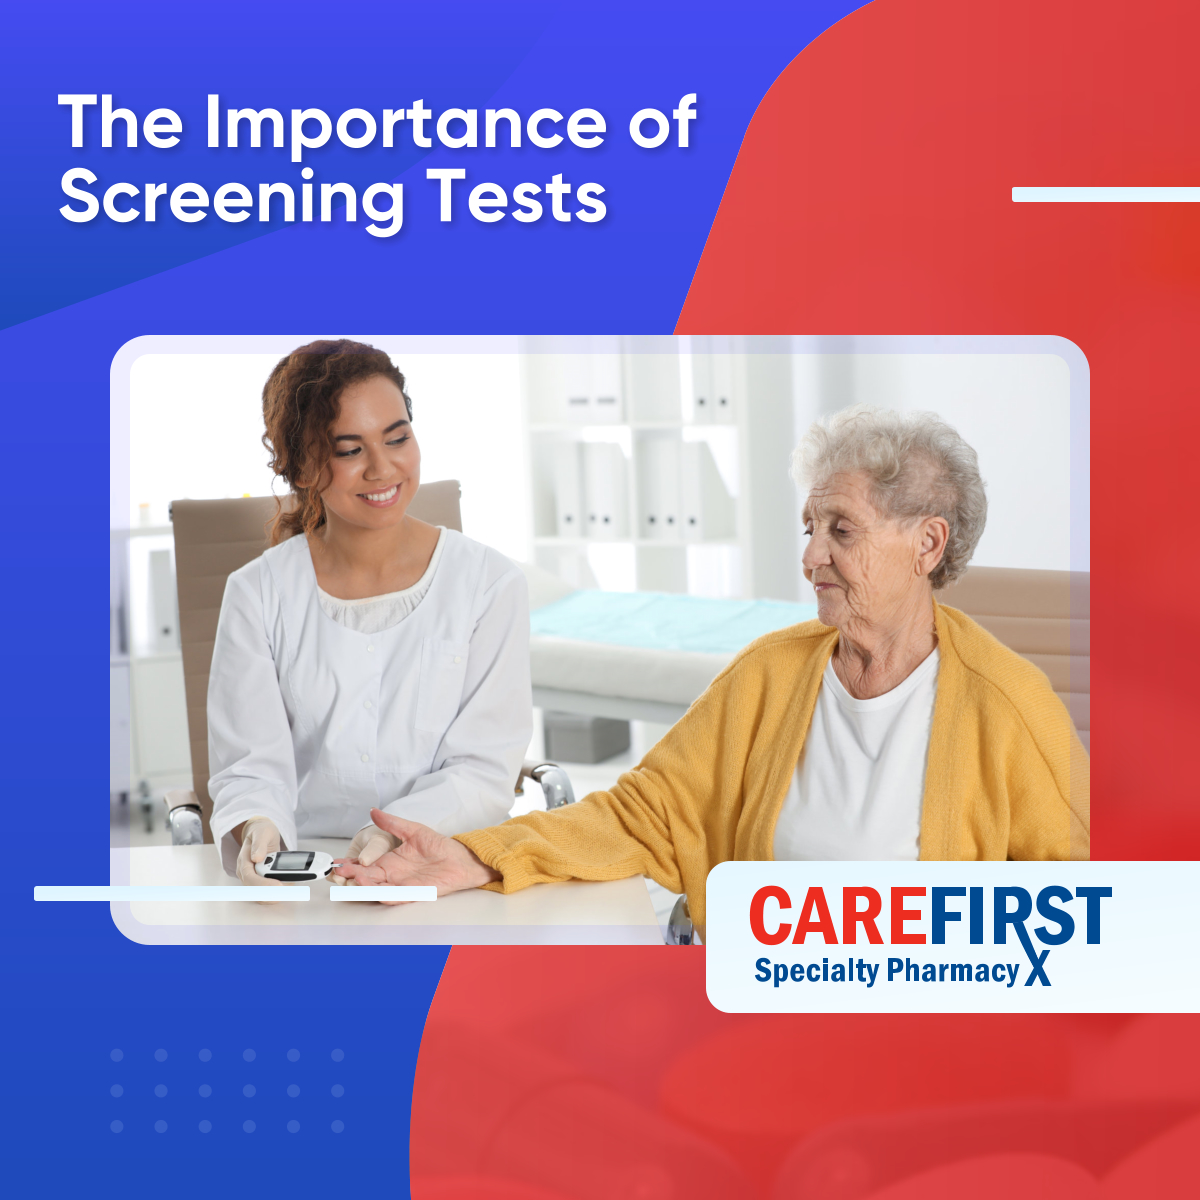 Screening tests, such as blood tests, pap smears, and diabetes tests, are the first step in diagnosing potential diseases among individuals who are not presenting symptoms. 

Read more: facebook.com/permalink.php?…

#ScreeningTests #Pharmacy #CharlotteNC